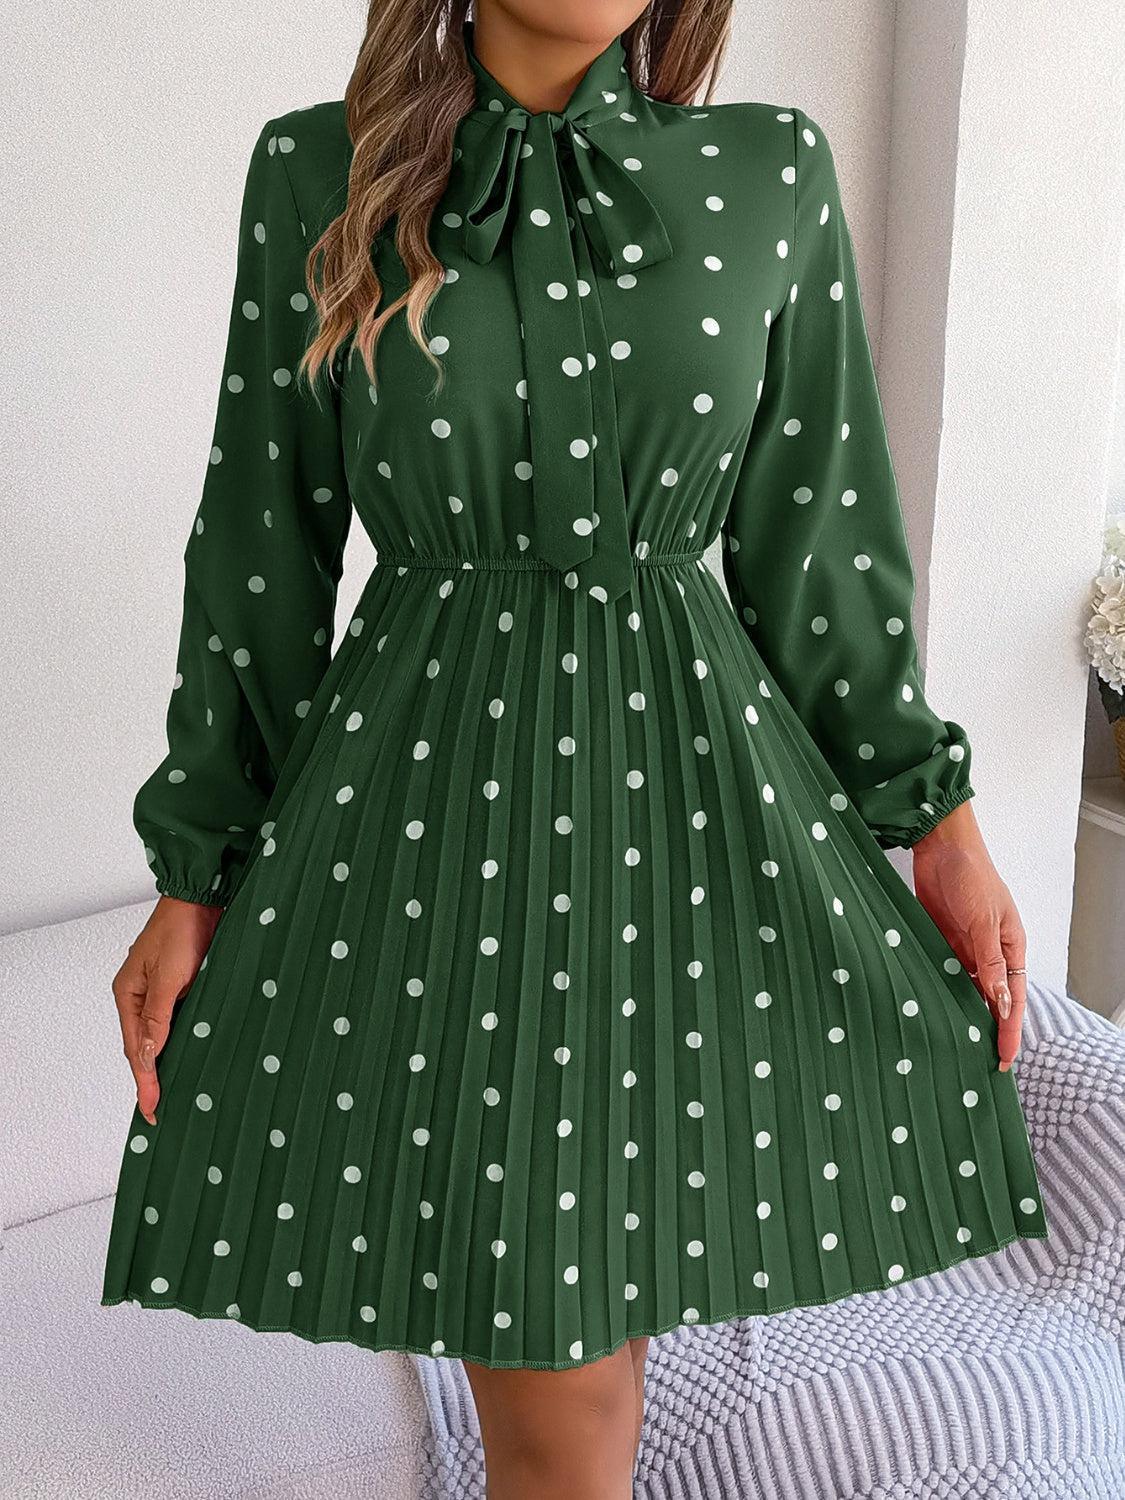 a woman wearing a green dress with white polka dots